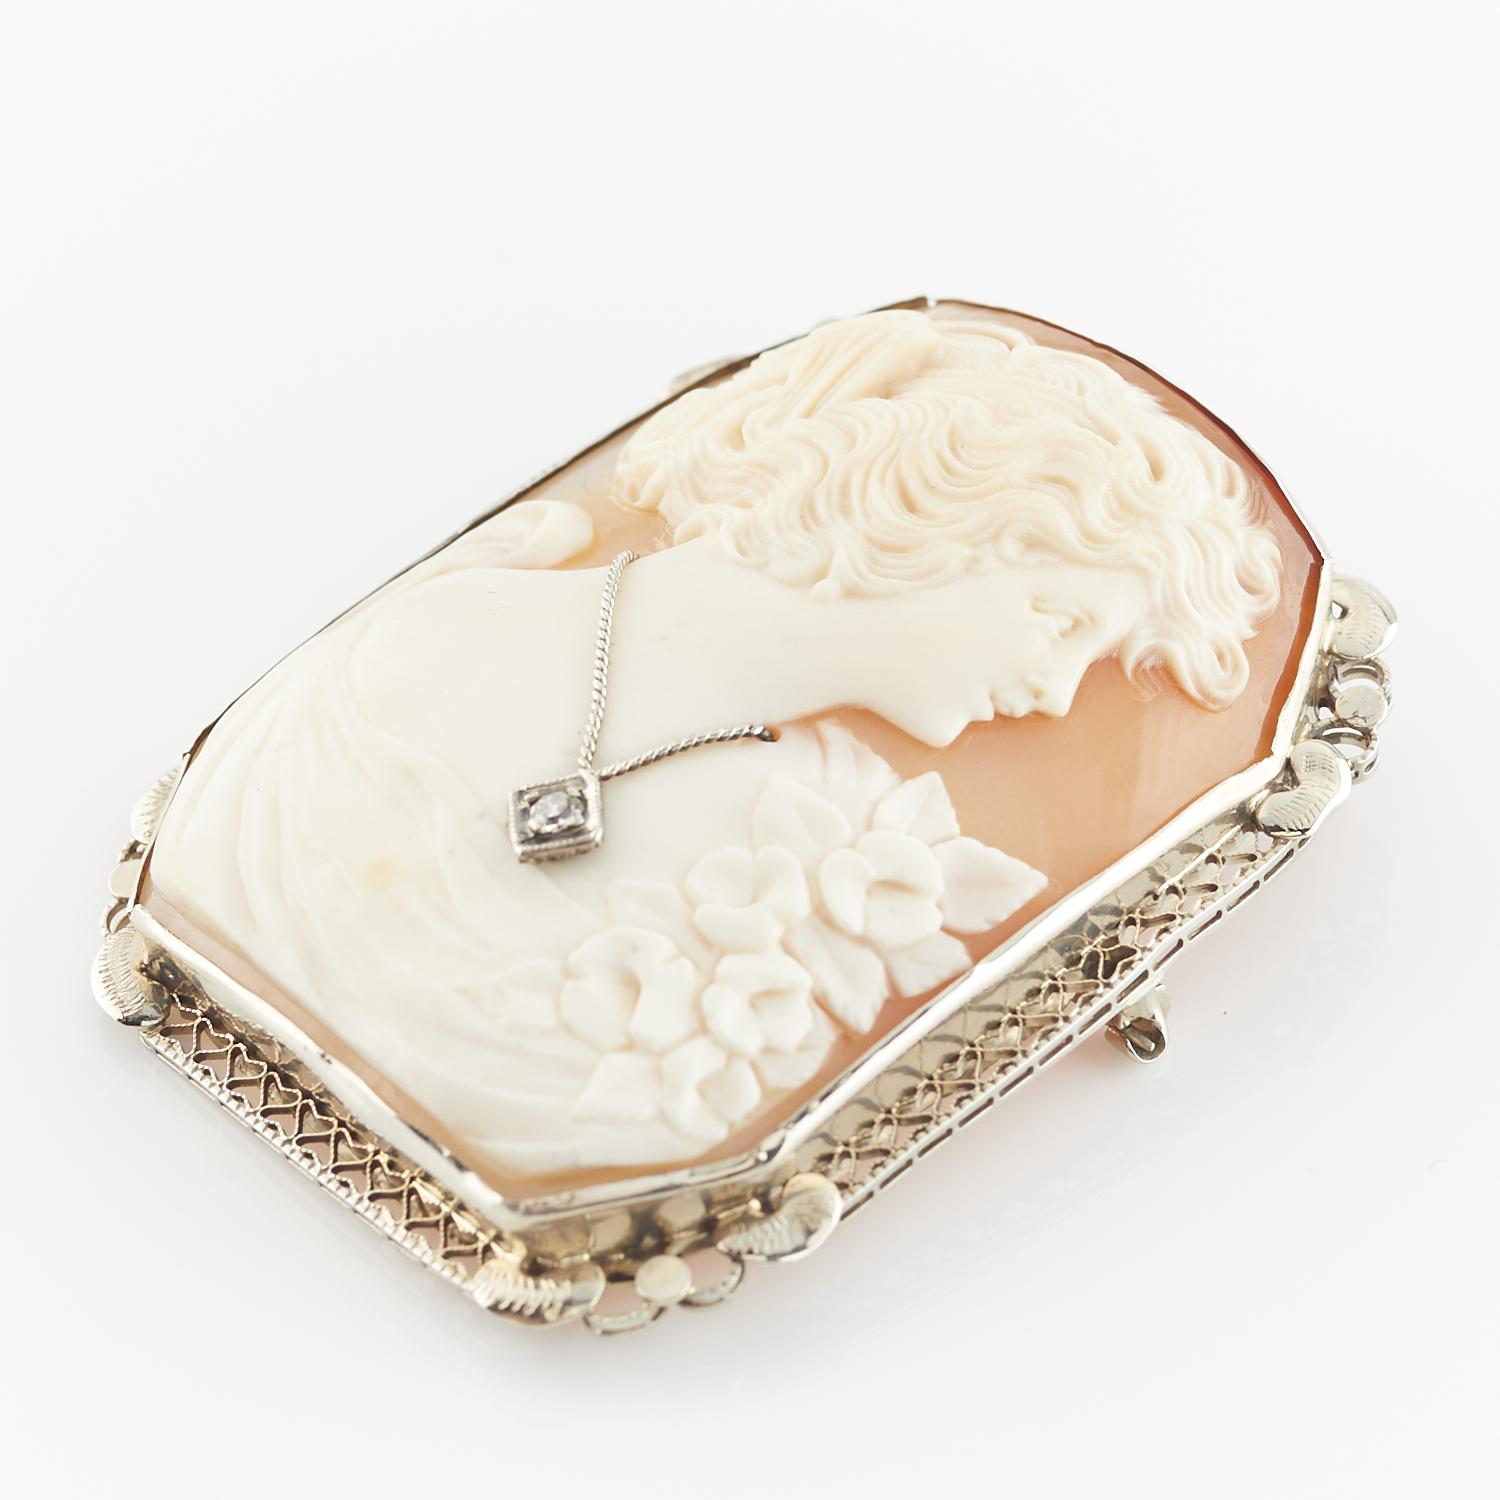 14k White Gold Cameo Habille Brooch w/ Diamond - Image 2 of 8